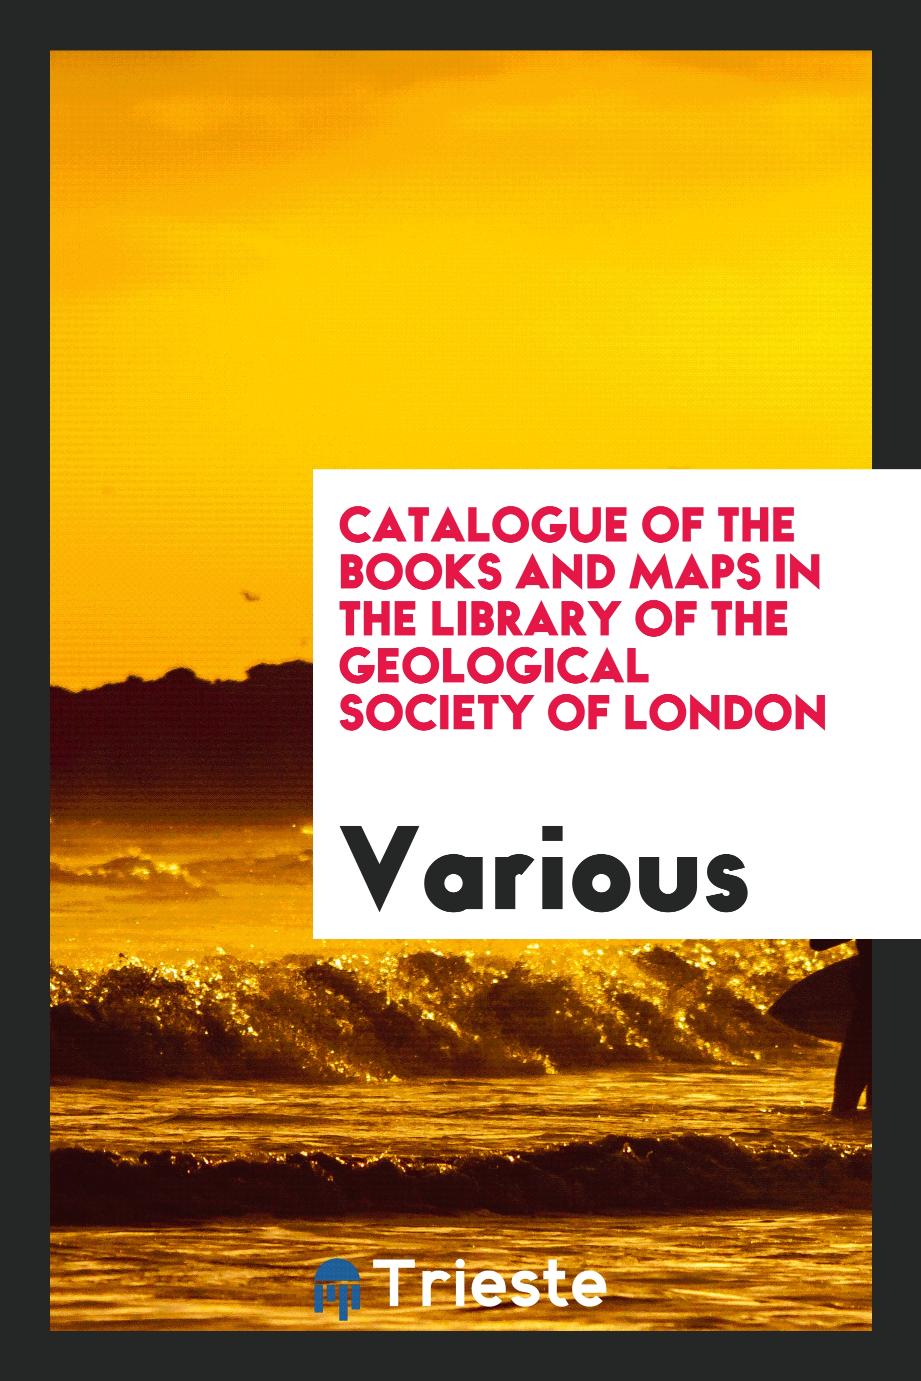 Catalogue of the Books and Maps in the Library of the Geological Society of London